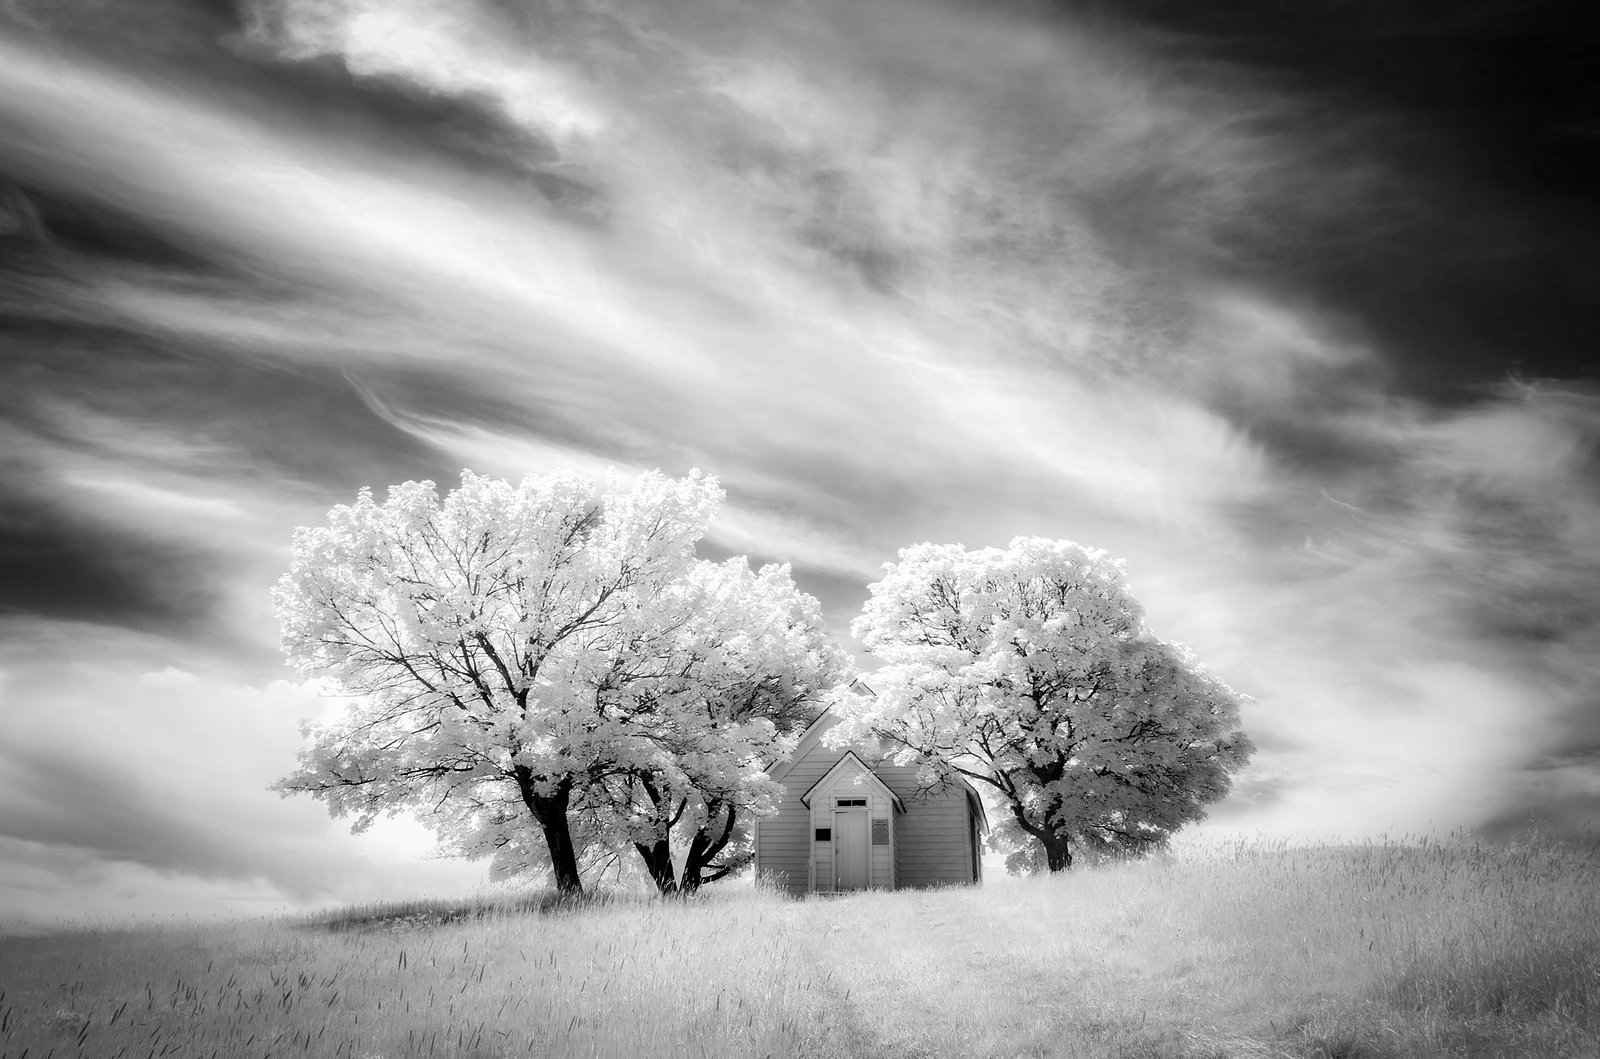 How Infrared Photography Can Turn Your Ordinary Images into Magical Photos